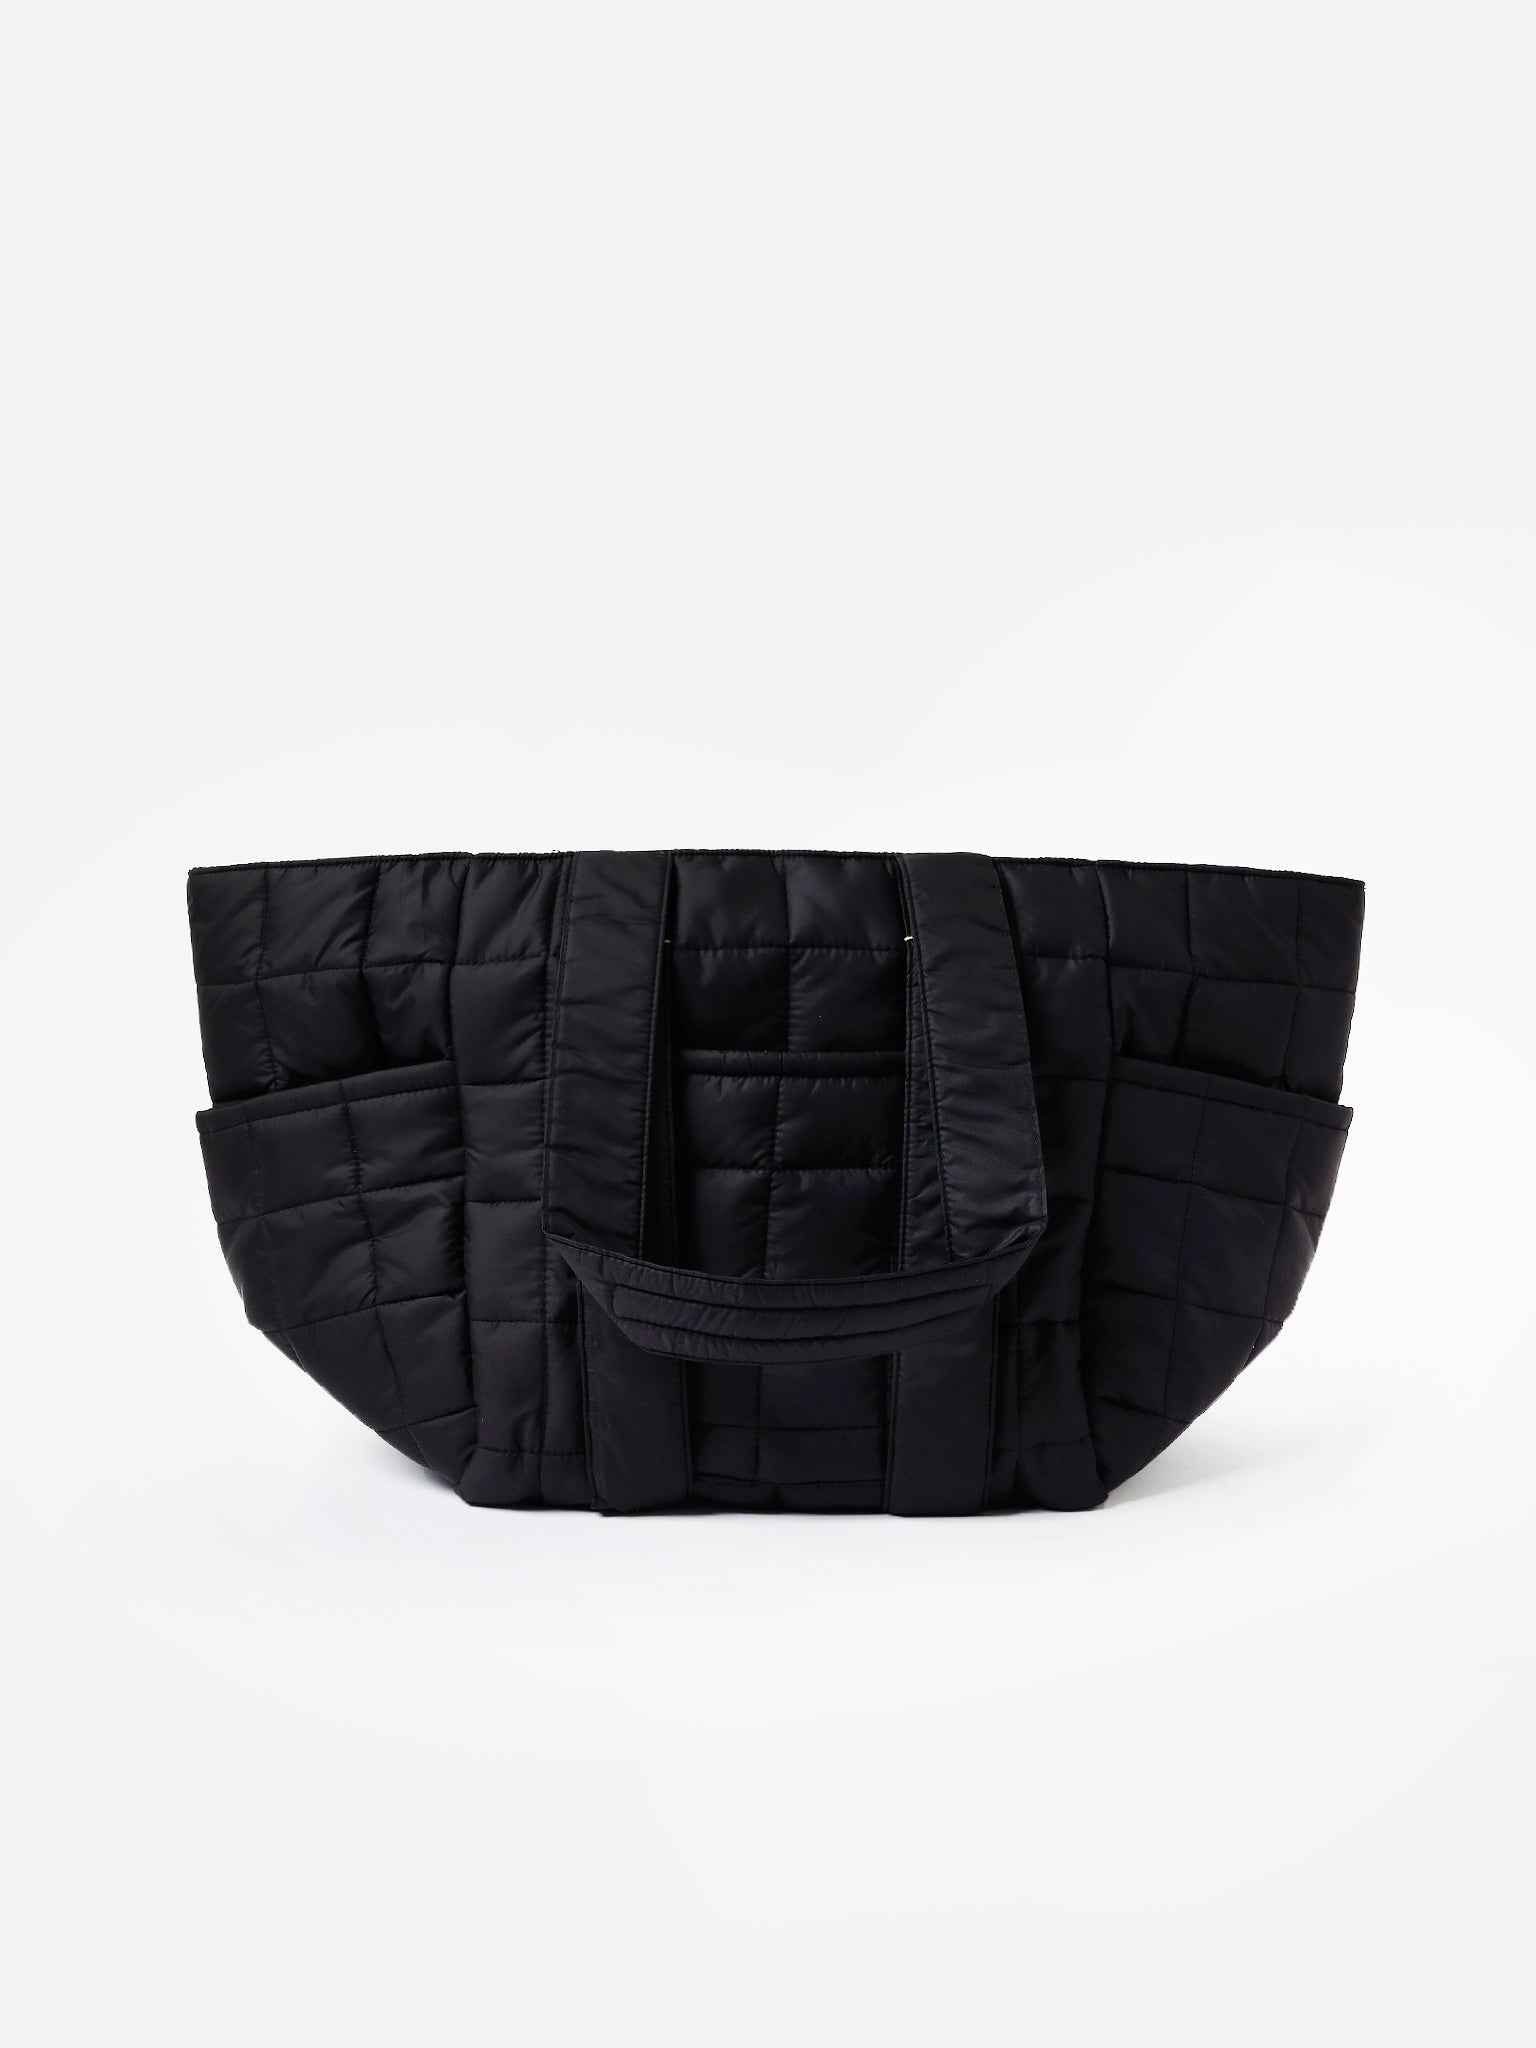 Clare V. Le Zip Sac Quilted V Puffer Tote in Black